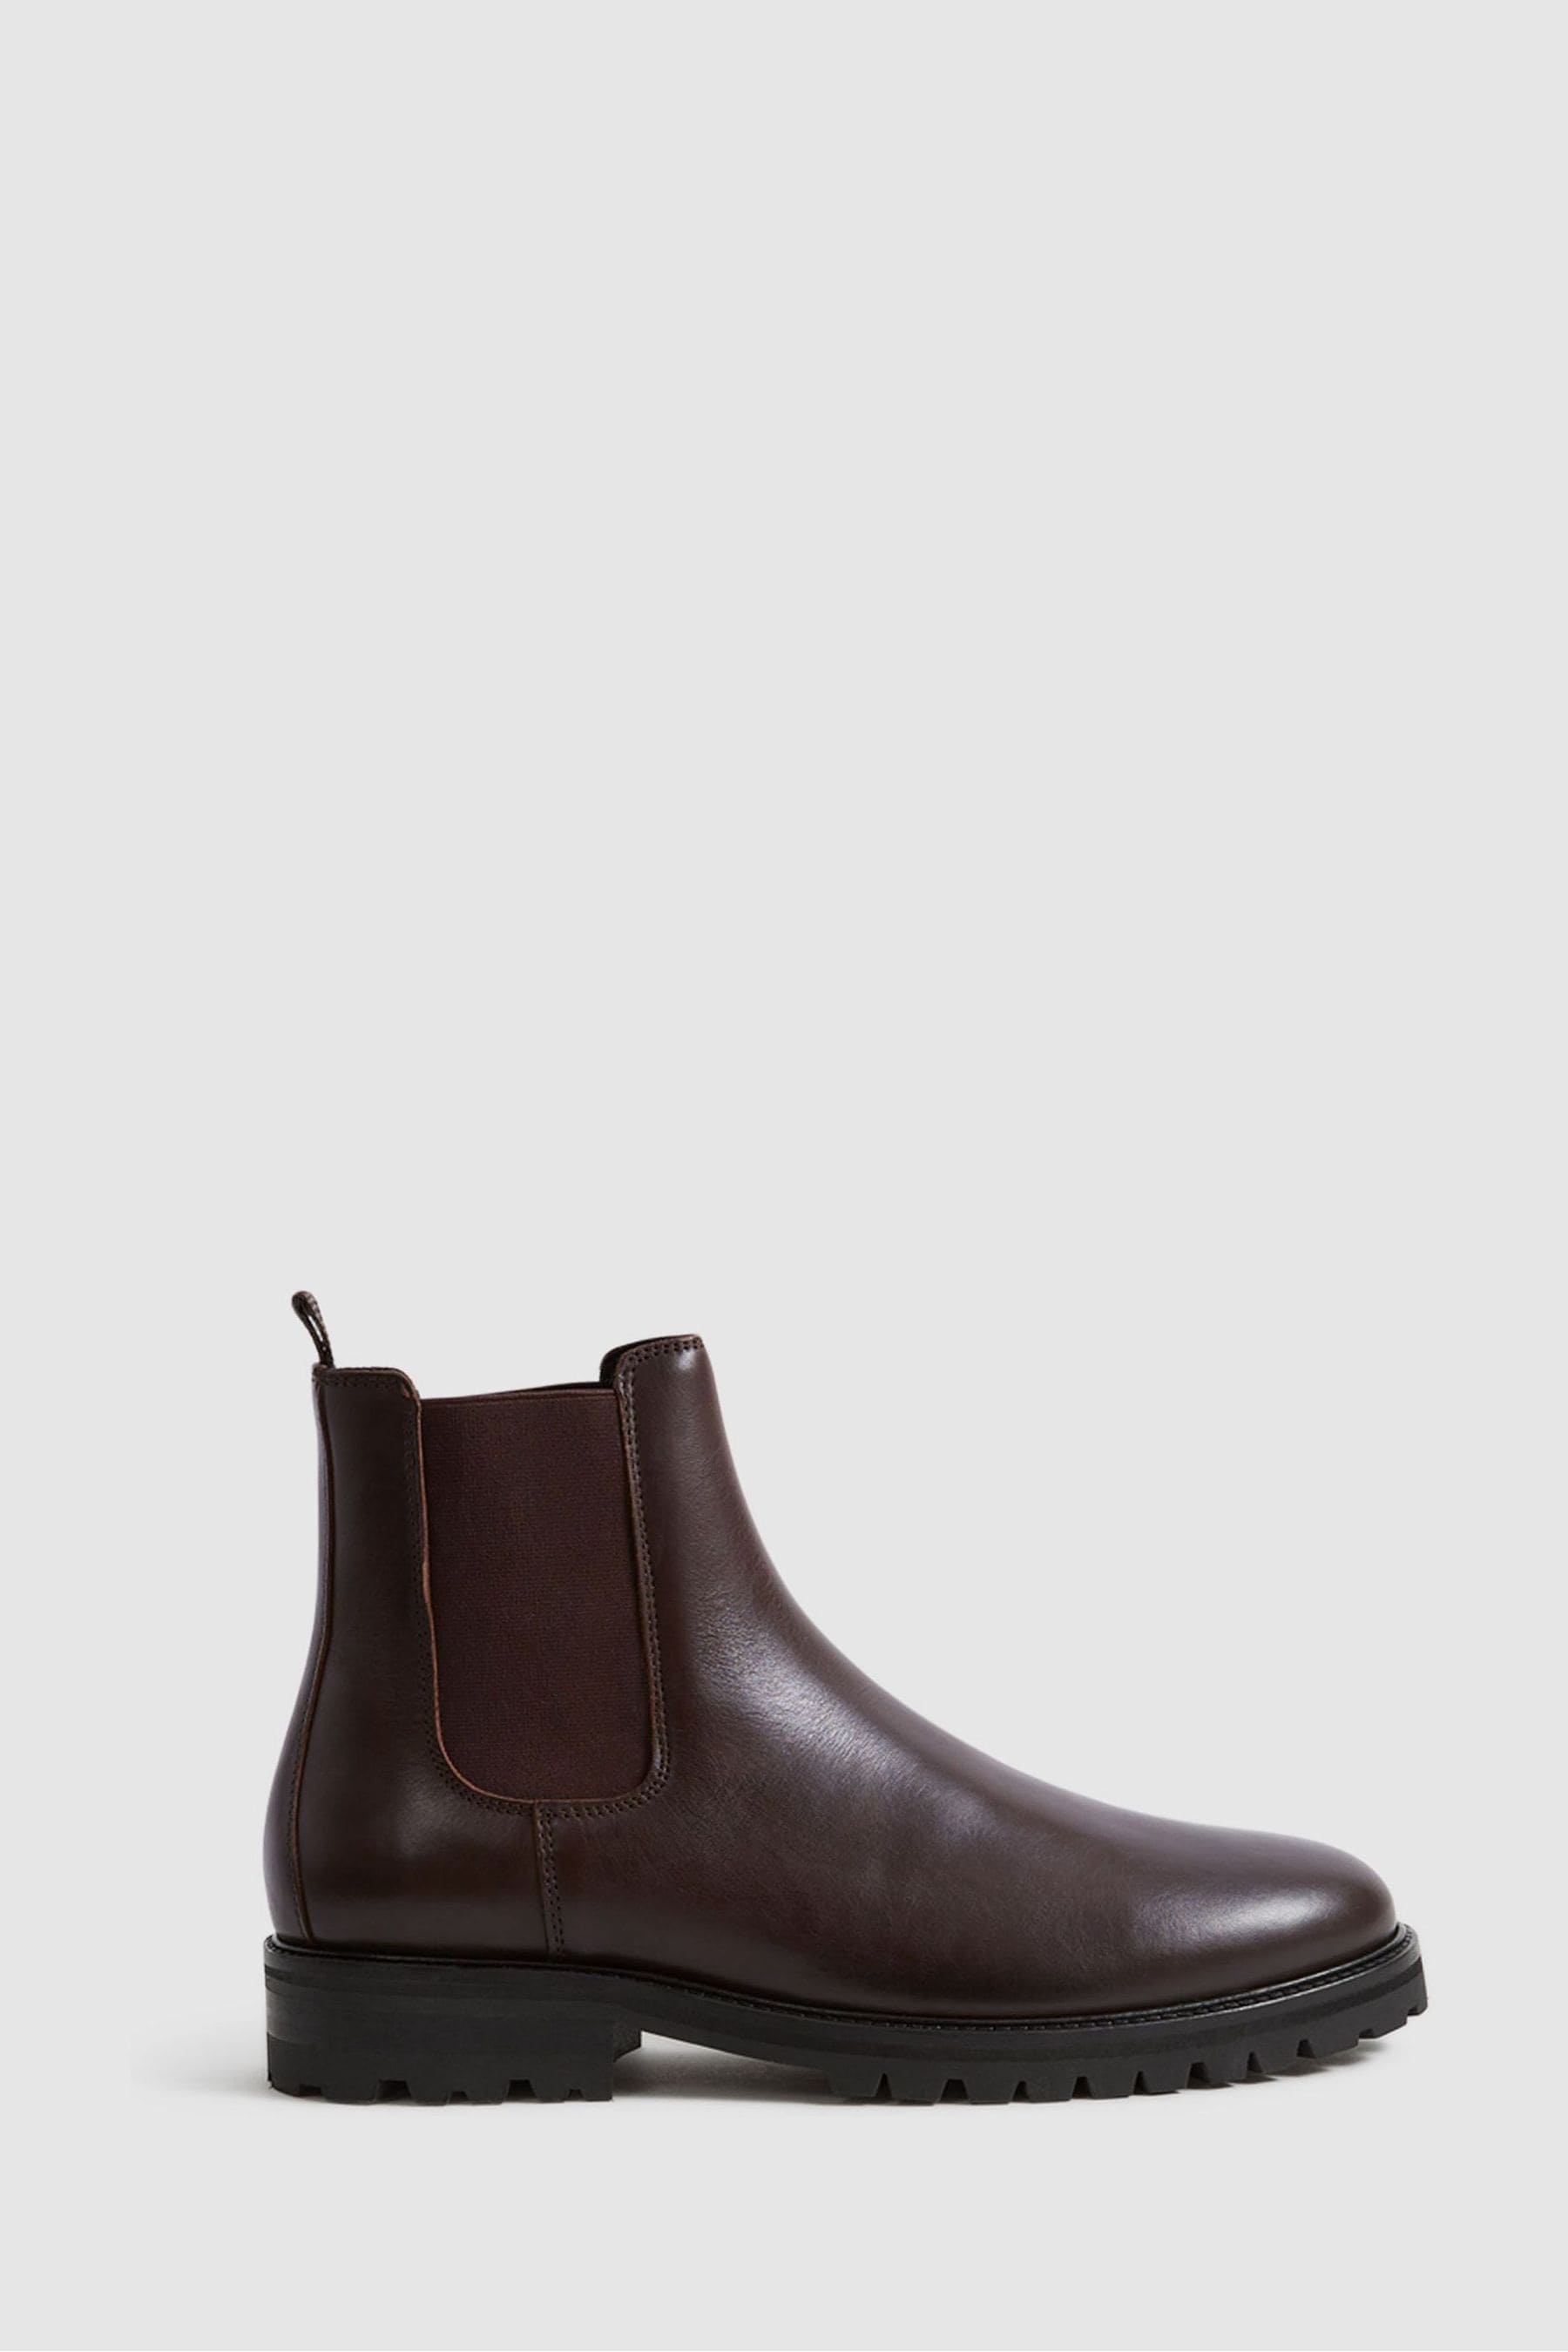 Reiss Mens Chocolate Chiltern Leather Chelsea Boots